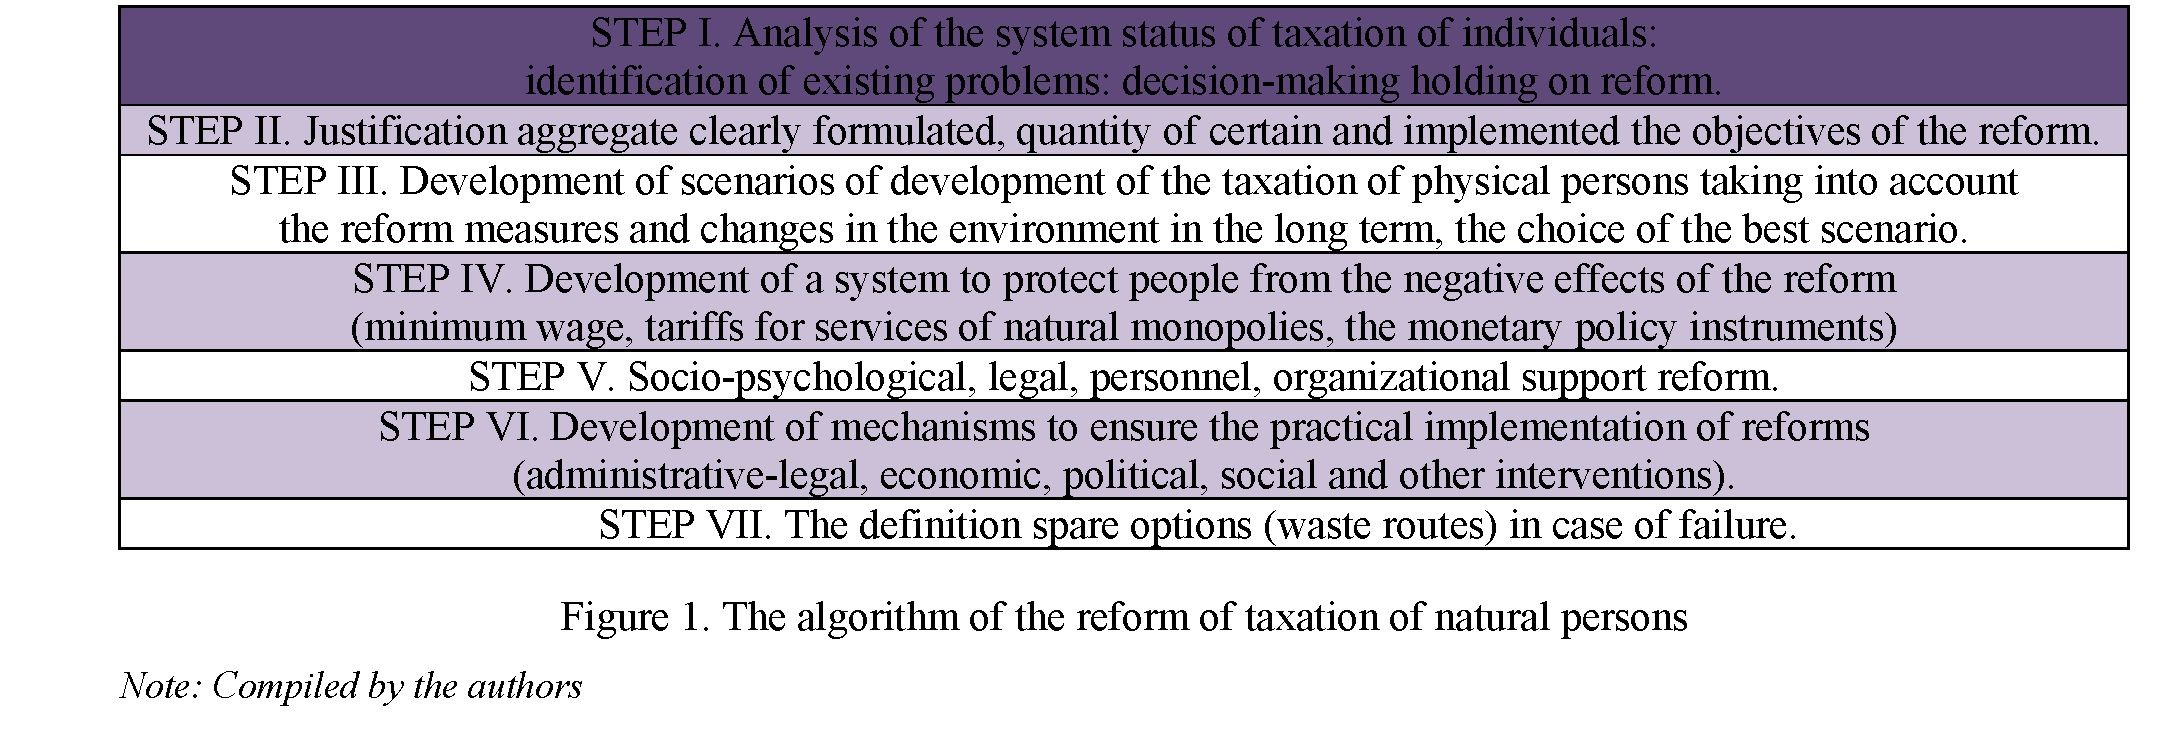 The historical experience of reforms of taxation of individuals in Russia and the Republic of Kazakhstan